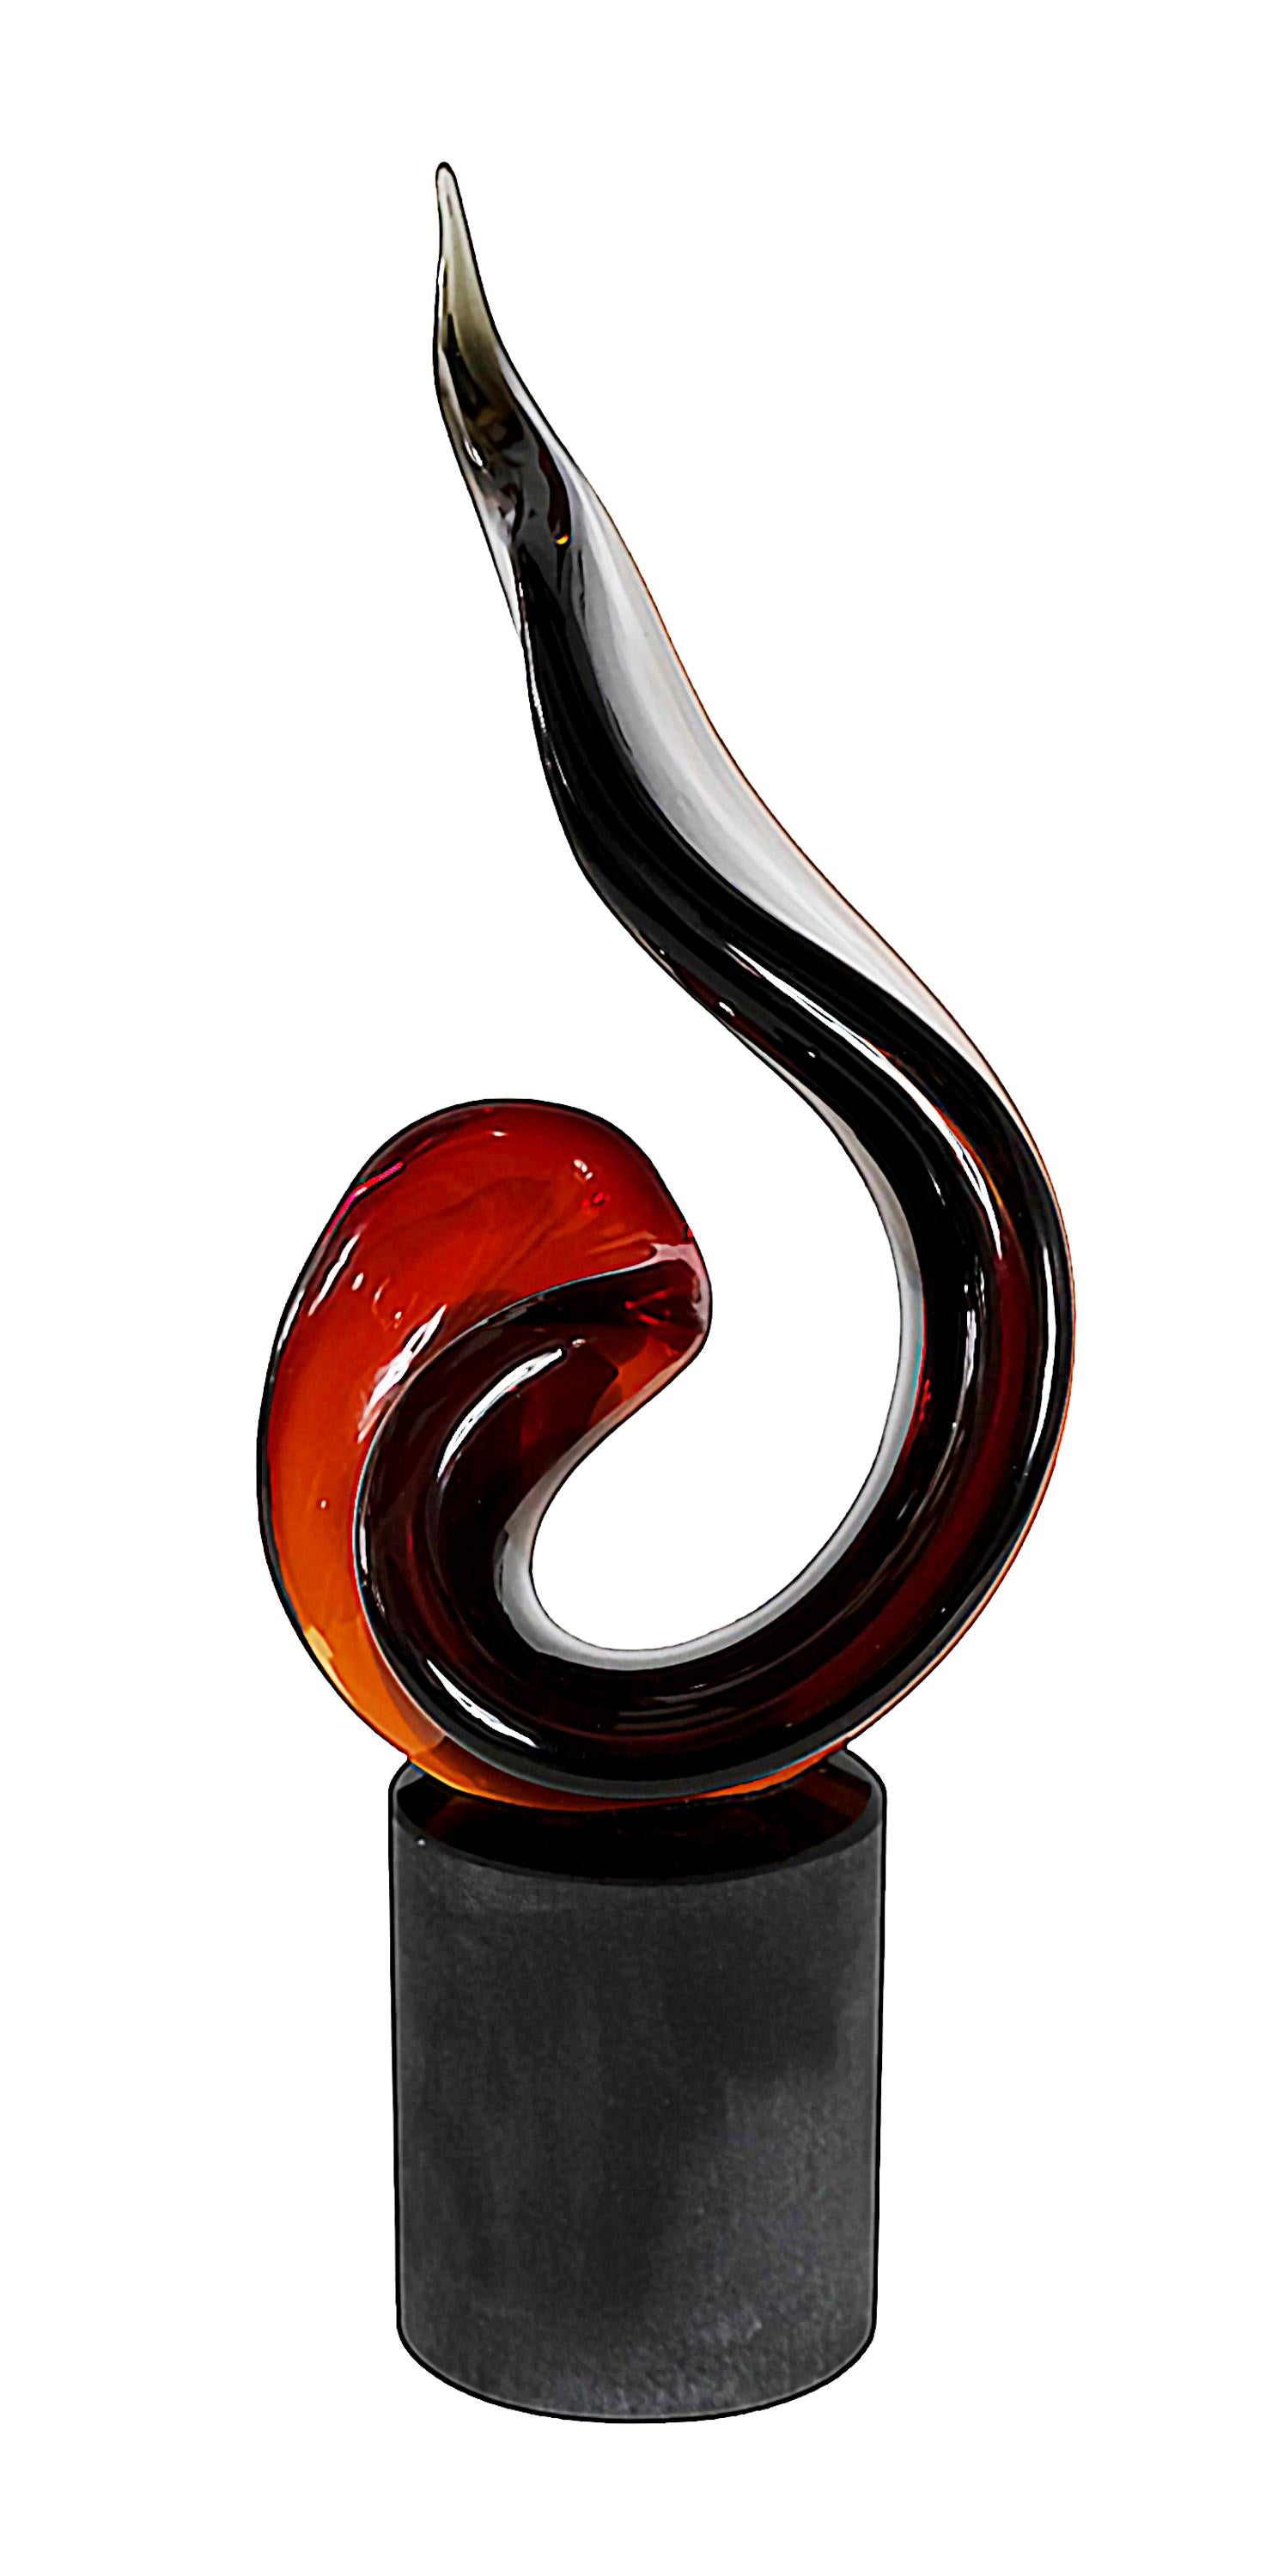 Italian handmade Murano glass abstract design sculpture.
Created and signed by Romano Dona.
The base is round in frosted black solid heavy glass. 
The sculpture element is in transition red, brown, grey color tones in the form of lame.

 